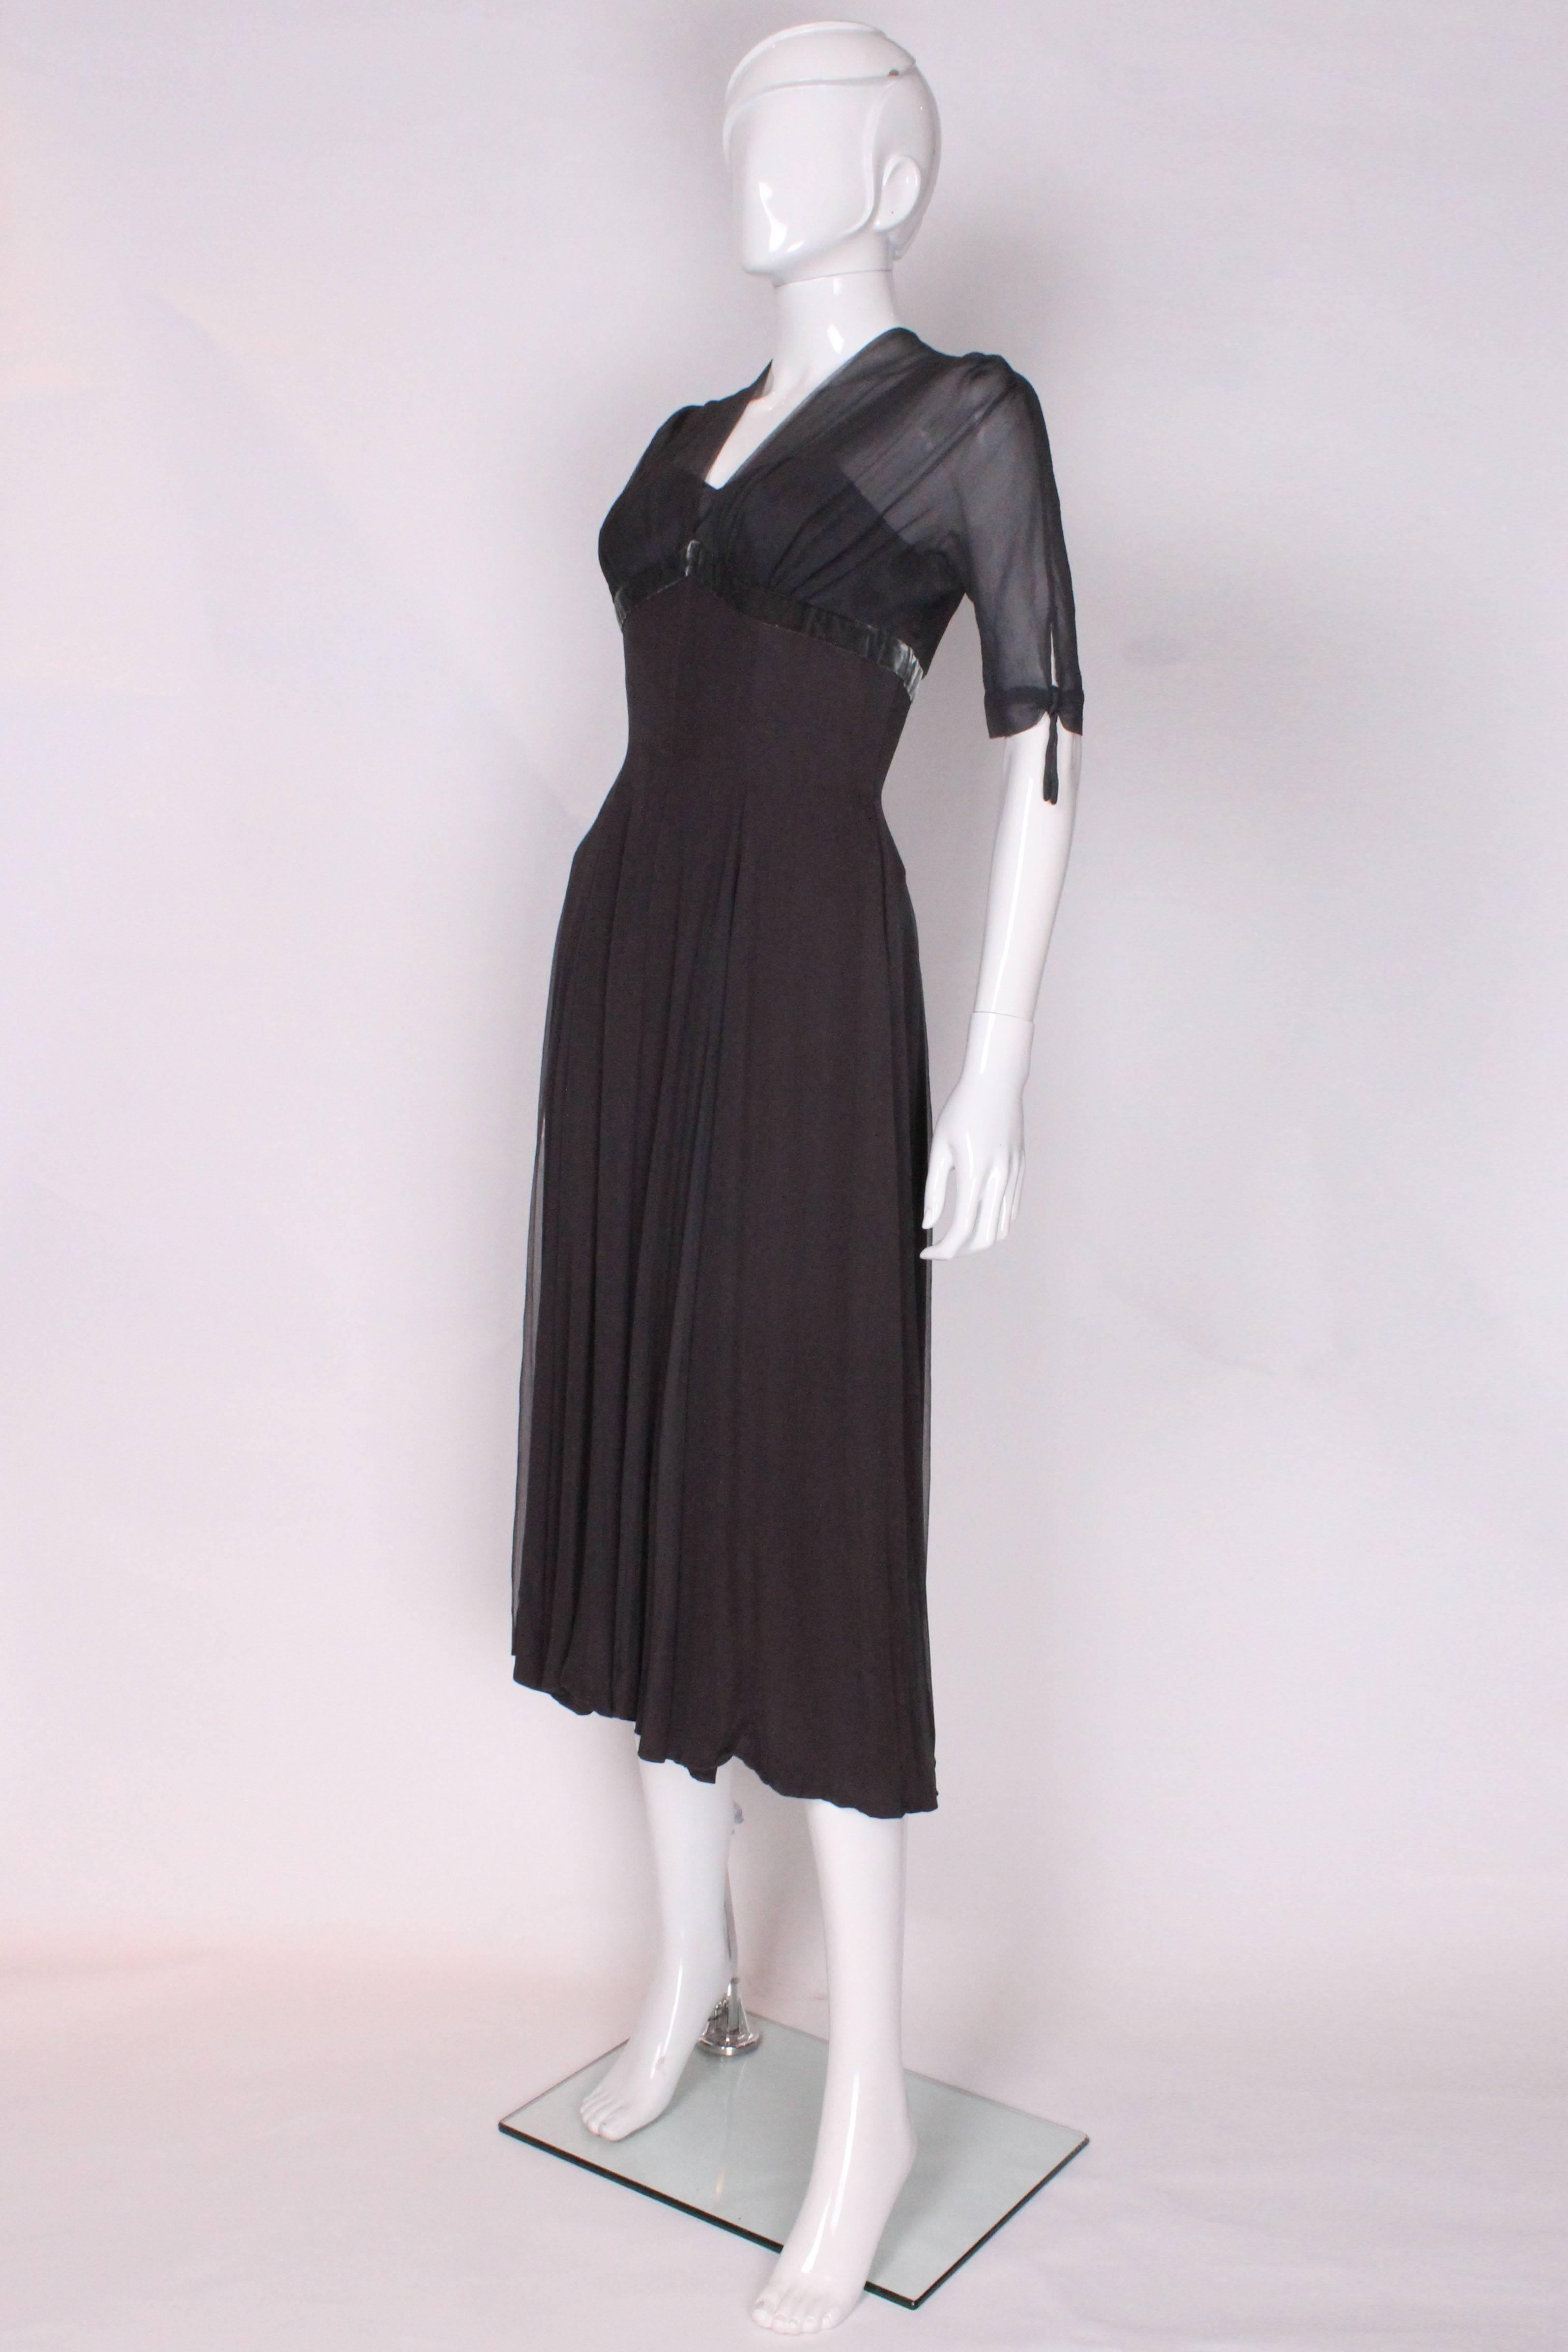 A chic cocktail dress designed by Worth, London. The dress has an outer layer of dark grey silk chiffon. The skirt is lined in a deep mauve/grey coloured fabric and the bust area in a slate grey. The dress has a v neckline and short sleeves. The